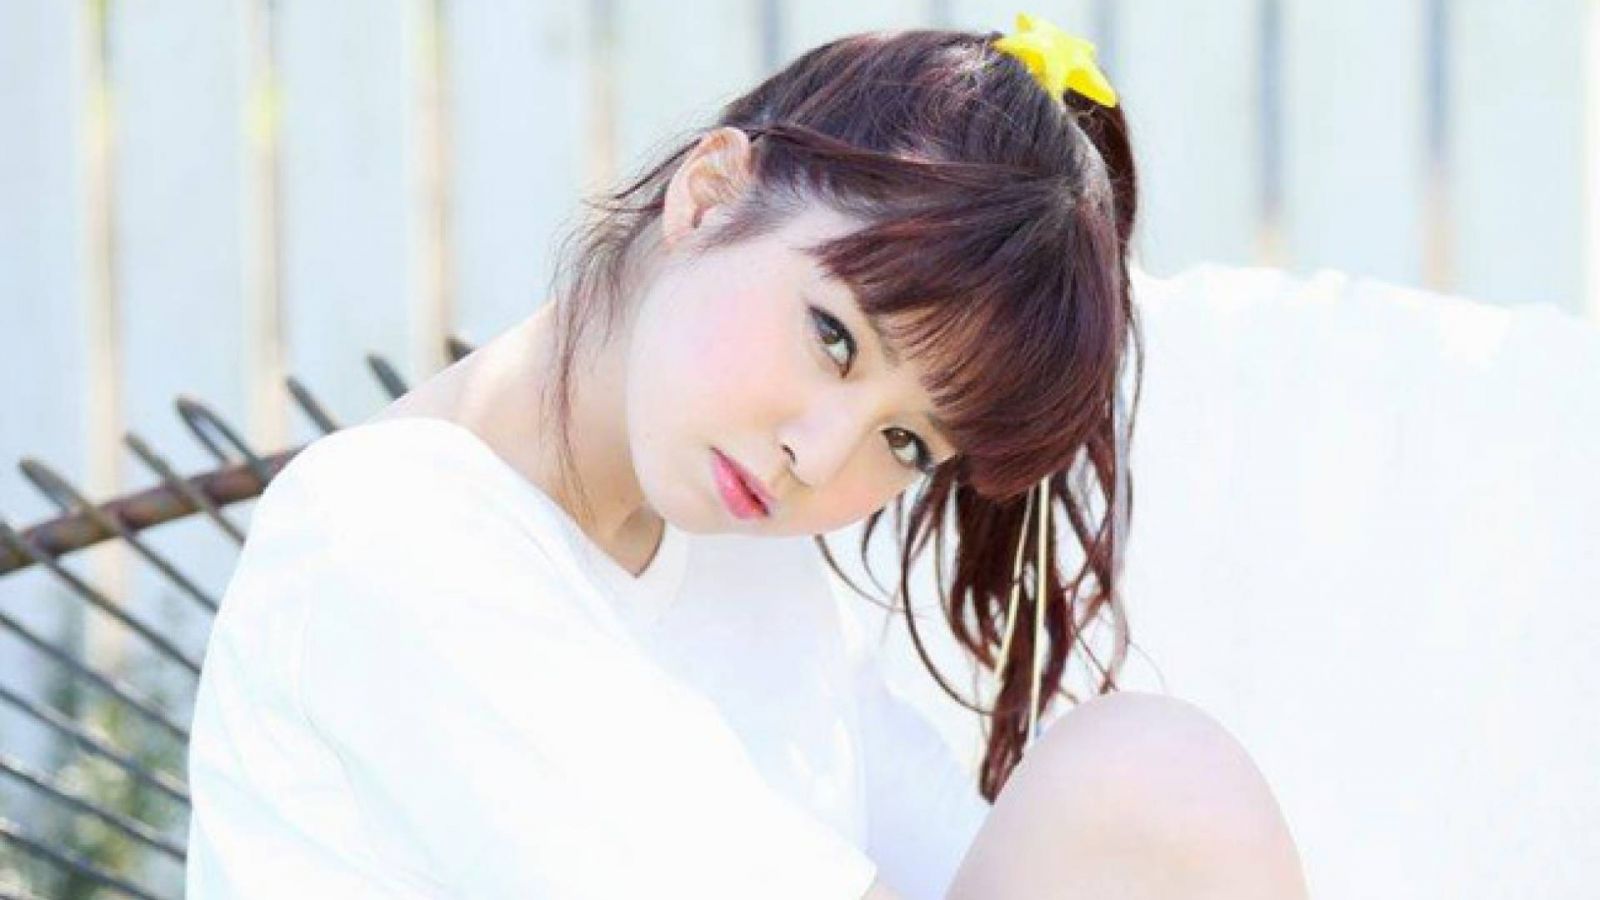 Haruna Luna to Release Upcoming Single Digitally Worldwide © Sony Music Entertainment (Japan) Inc. All rights reserved.